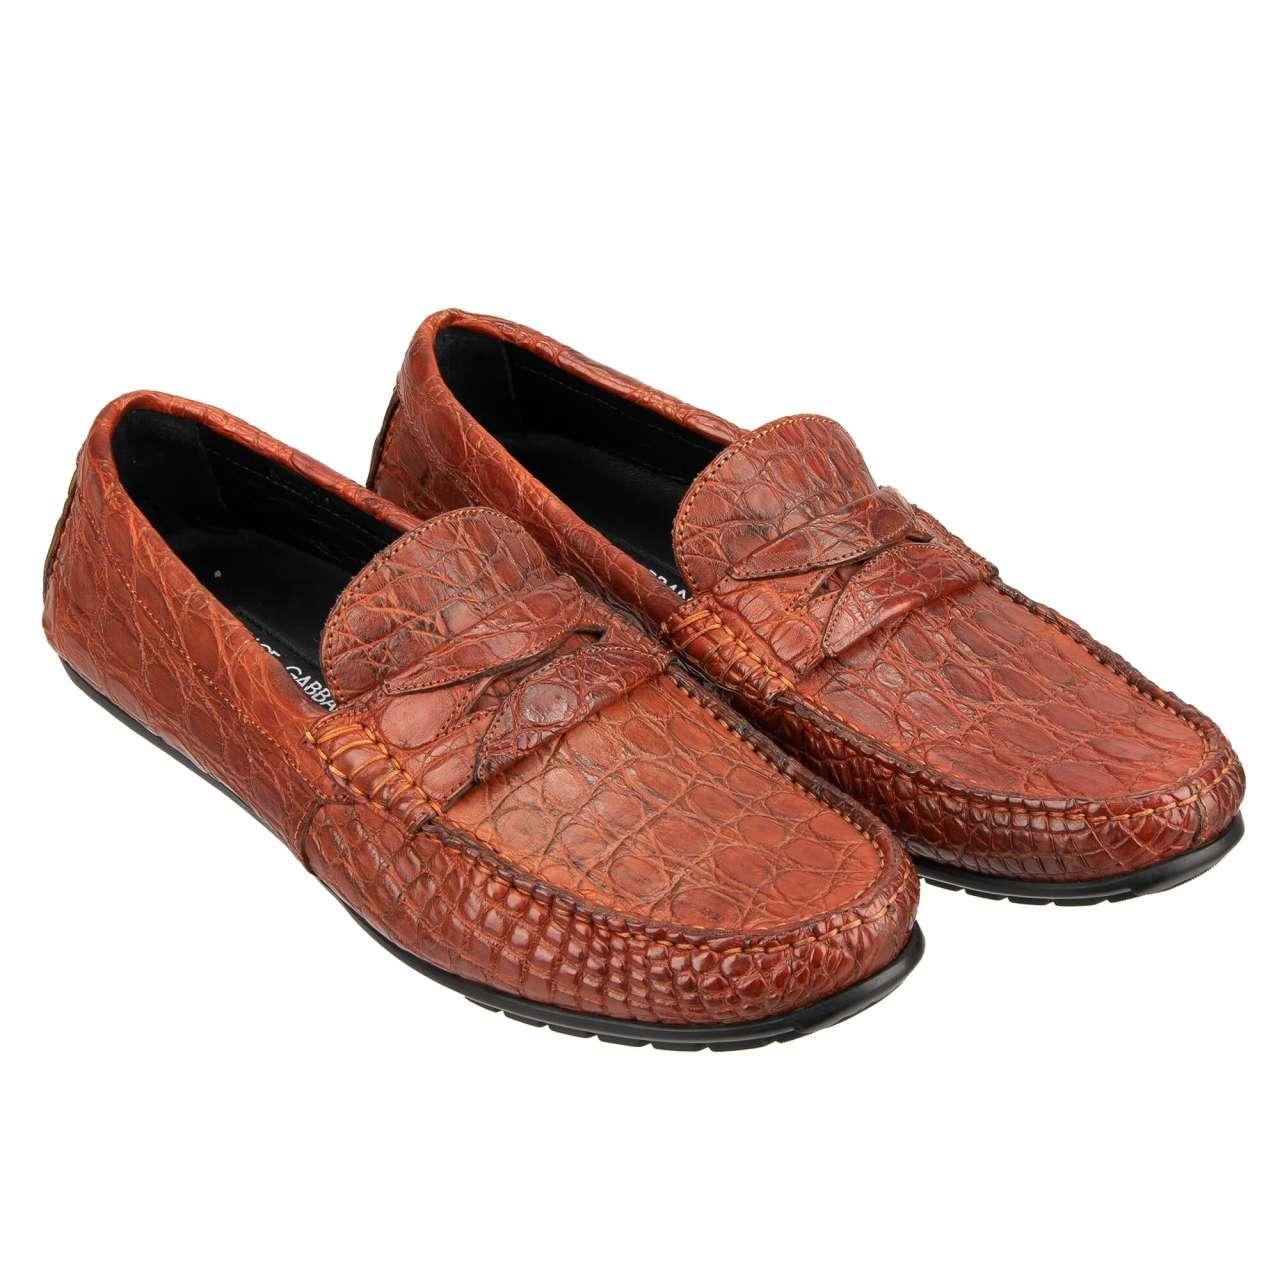 - Very exclusive and rare, crocodile leather loafer shoes in orange by DOLCE & GABBANA - MADE IN ITALY - Former RRP: EUR 4.750 - New with Box - Model: A30004-A2D60-8H250 - Material: 100% Caimano - Sole: Leather - Color: Orange - Leather footbed -